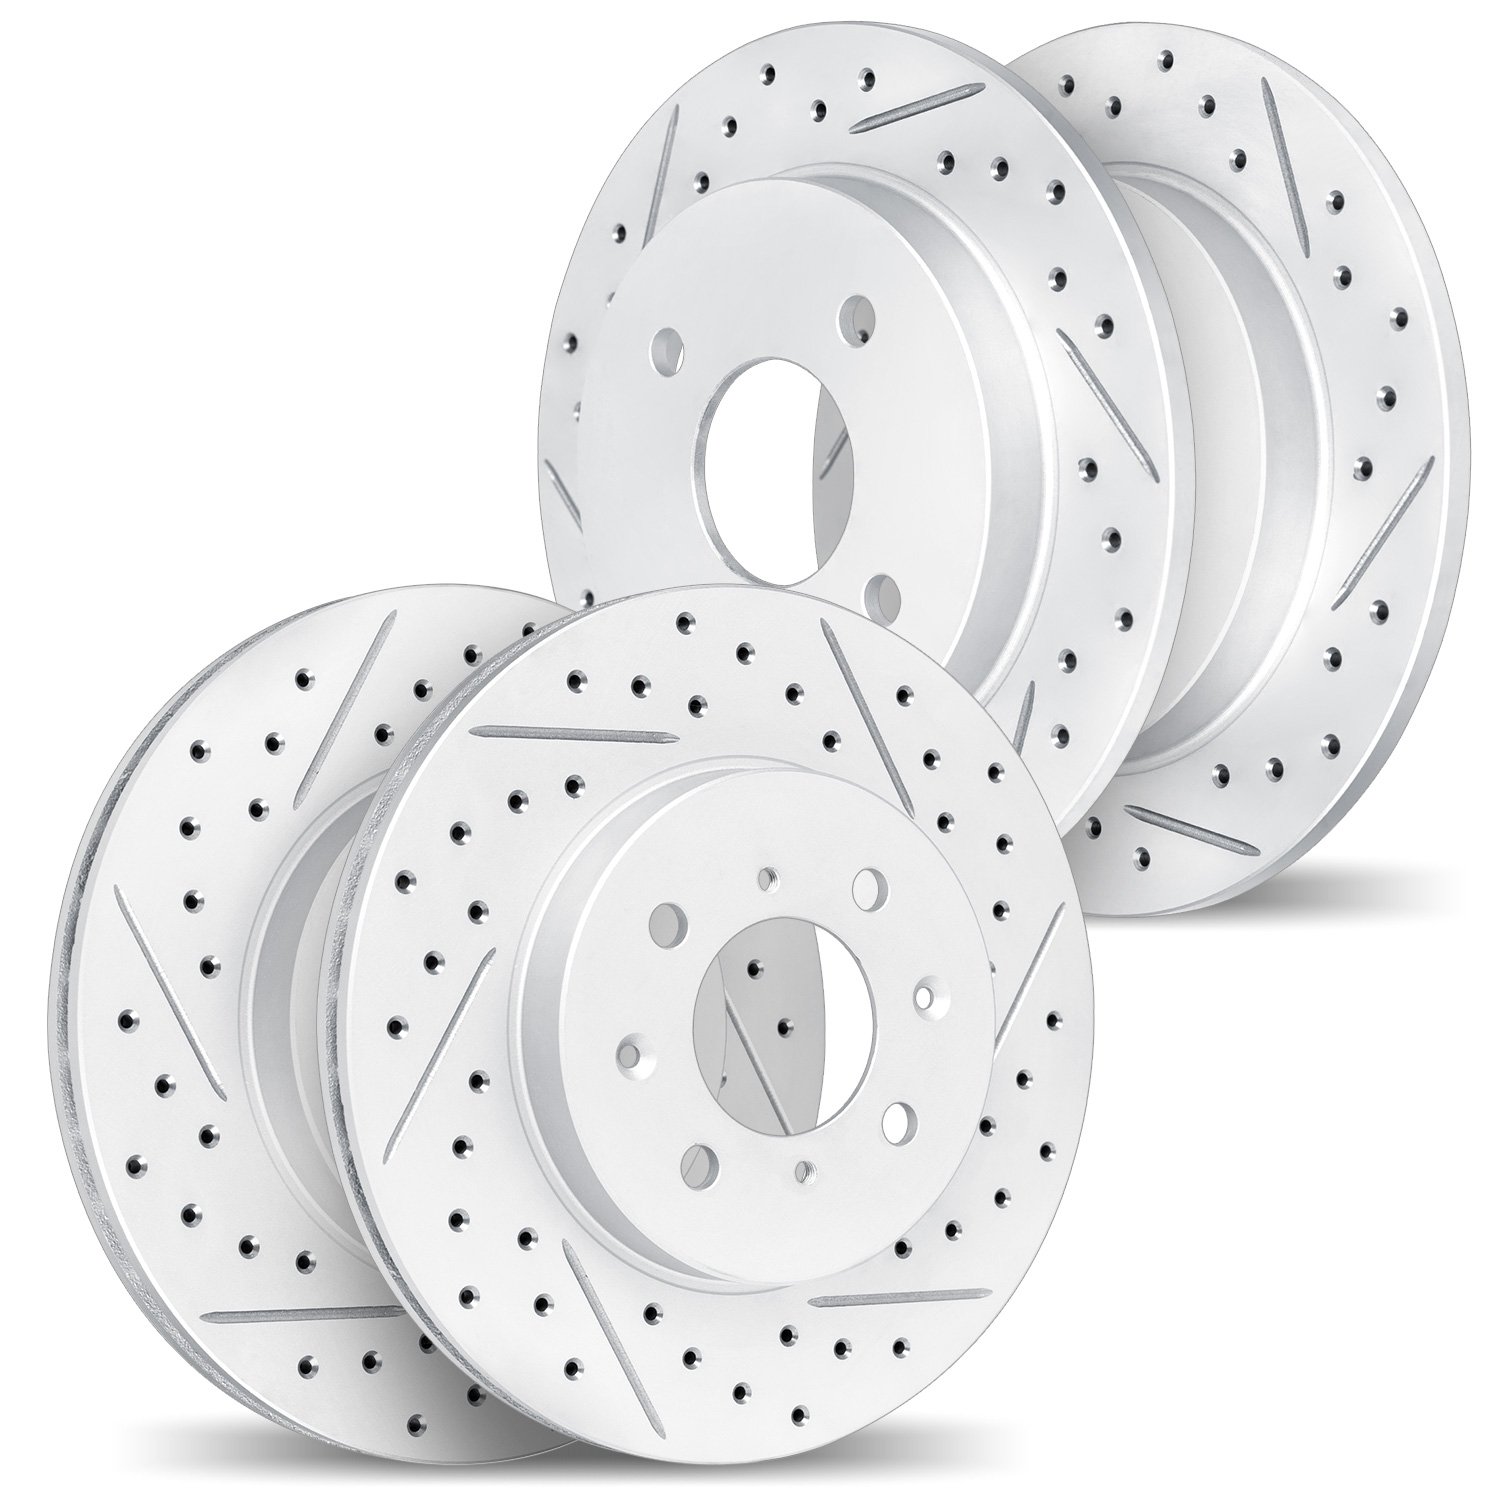 2004-07001 Geoperformance Drilled/Slotted Brake Rotors, 2012-2019 Mopar, Position: Front and Rear